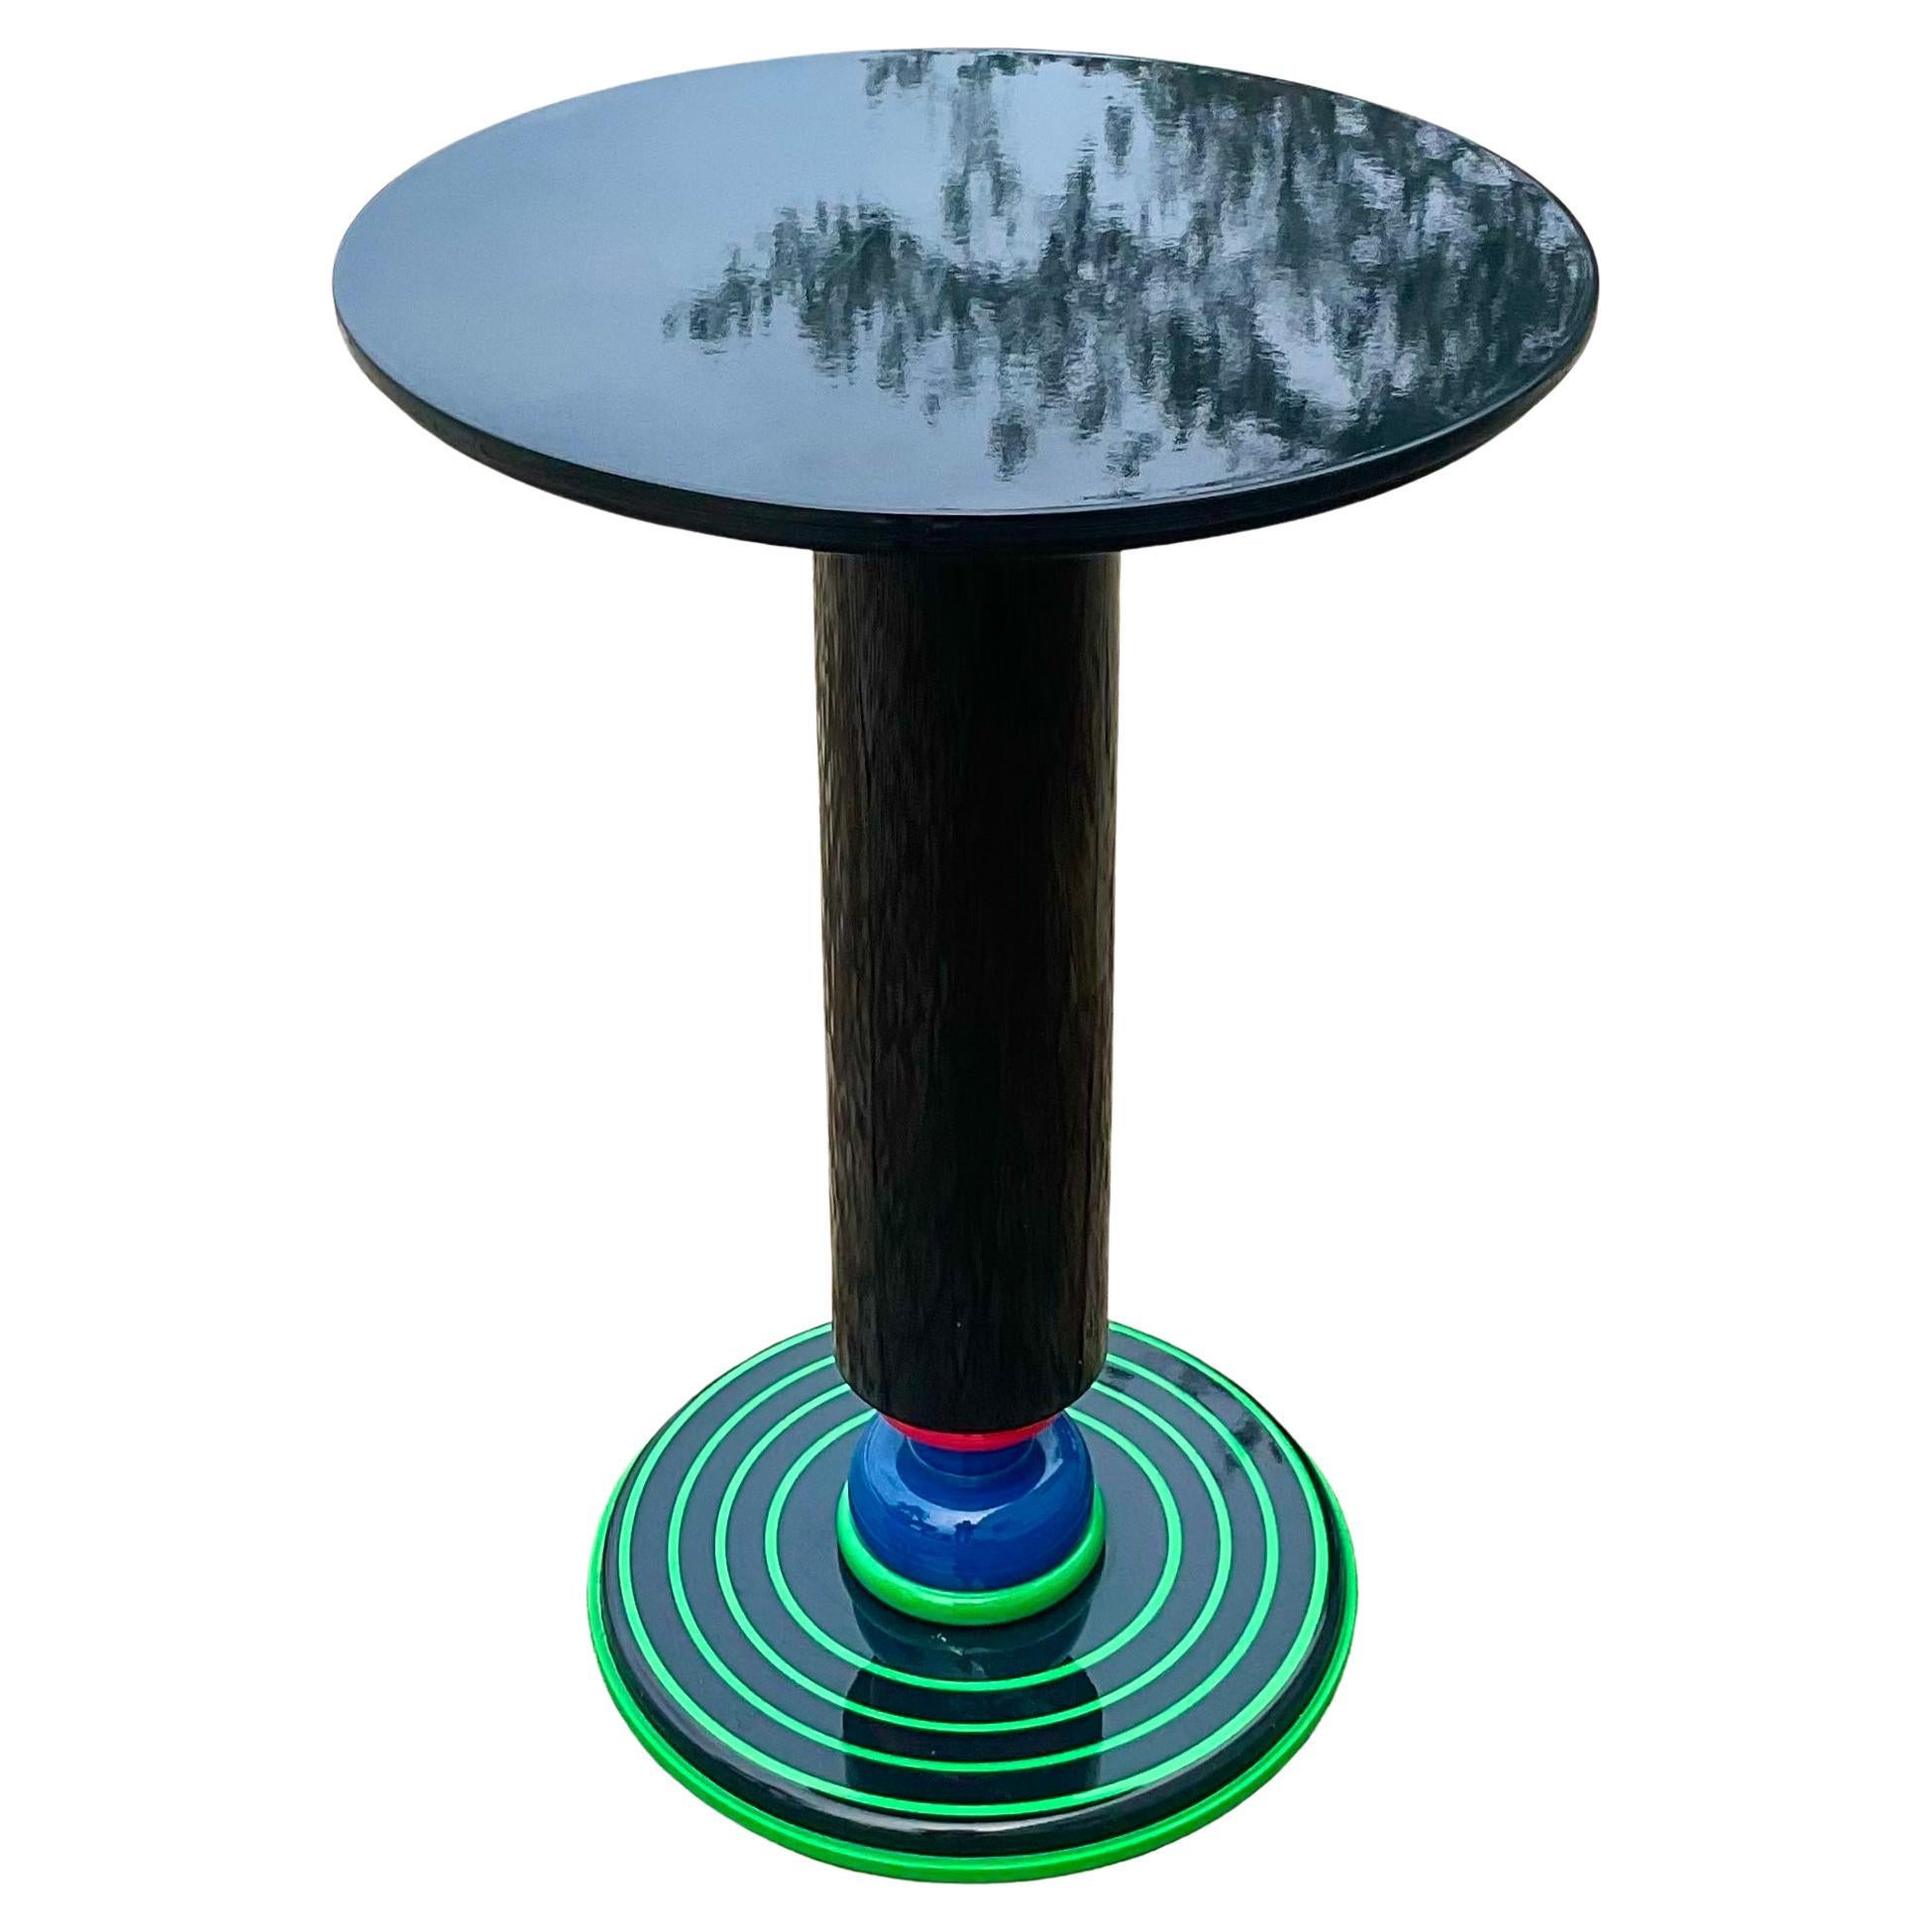 Contemporary Olivier Villatte Striped lacquered Drinks Table